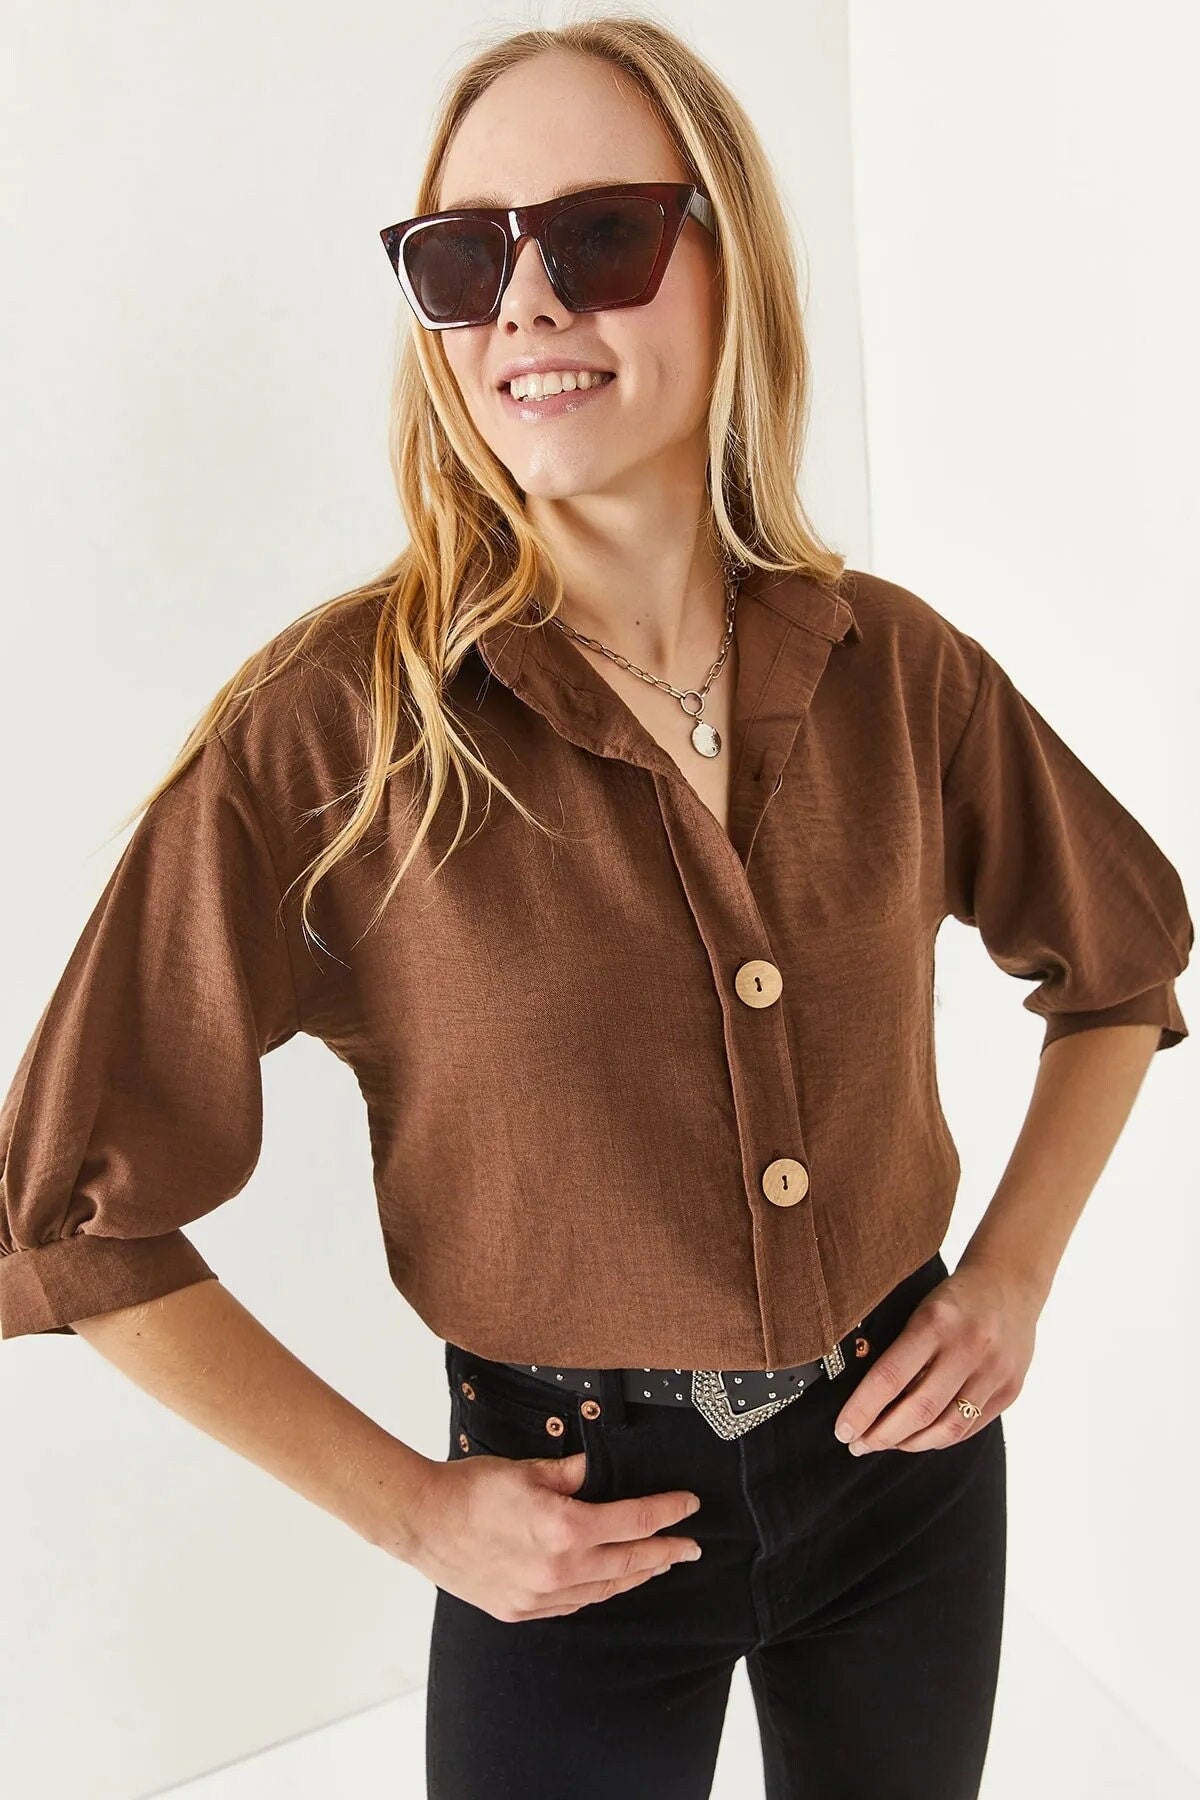 Wooden Buttoned Three Quarter Sleeve Minimalist & Affordable Woman Blouse, Vintage Blouse,Gift For Her, Collar Blouse,Boho Blouse 3